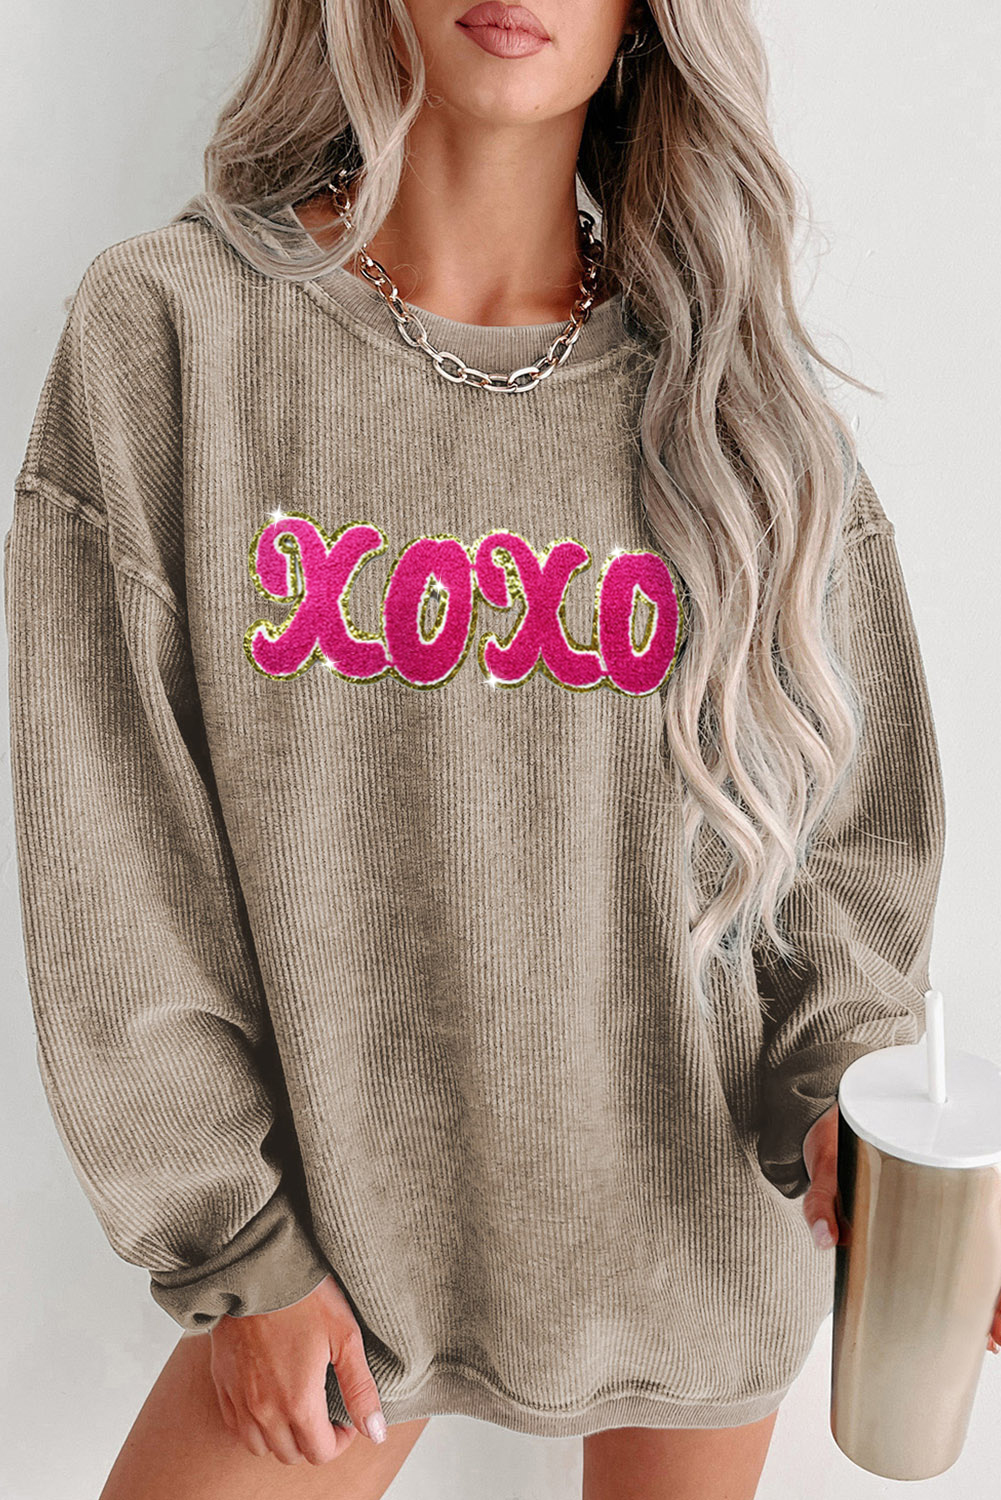 Shewin Wholesale Southern Clothes Khaki Corded xoxo Chenille Glitter PATCHES Graphic Sweatshirt